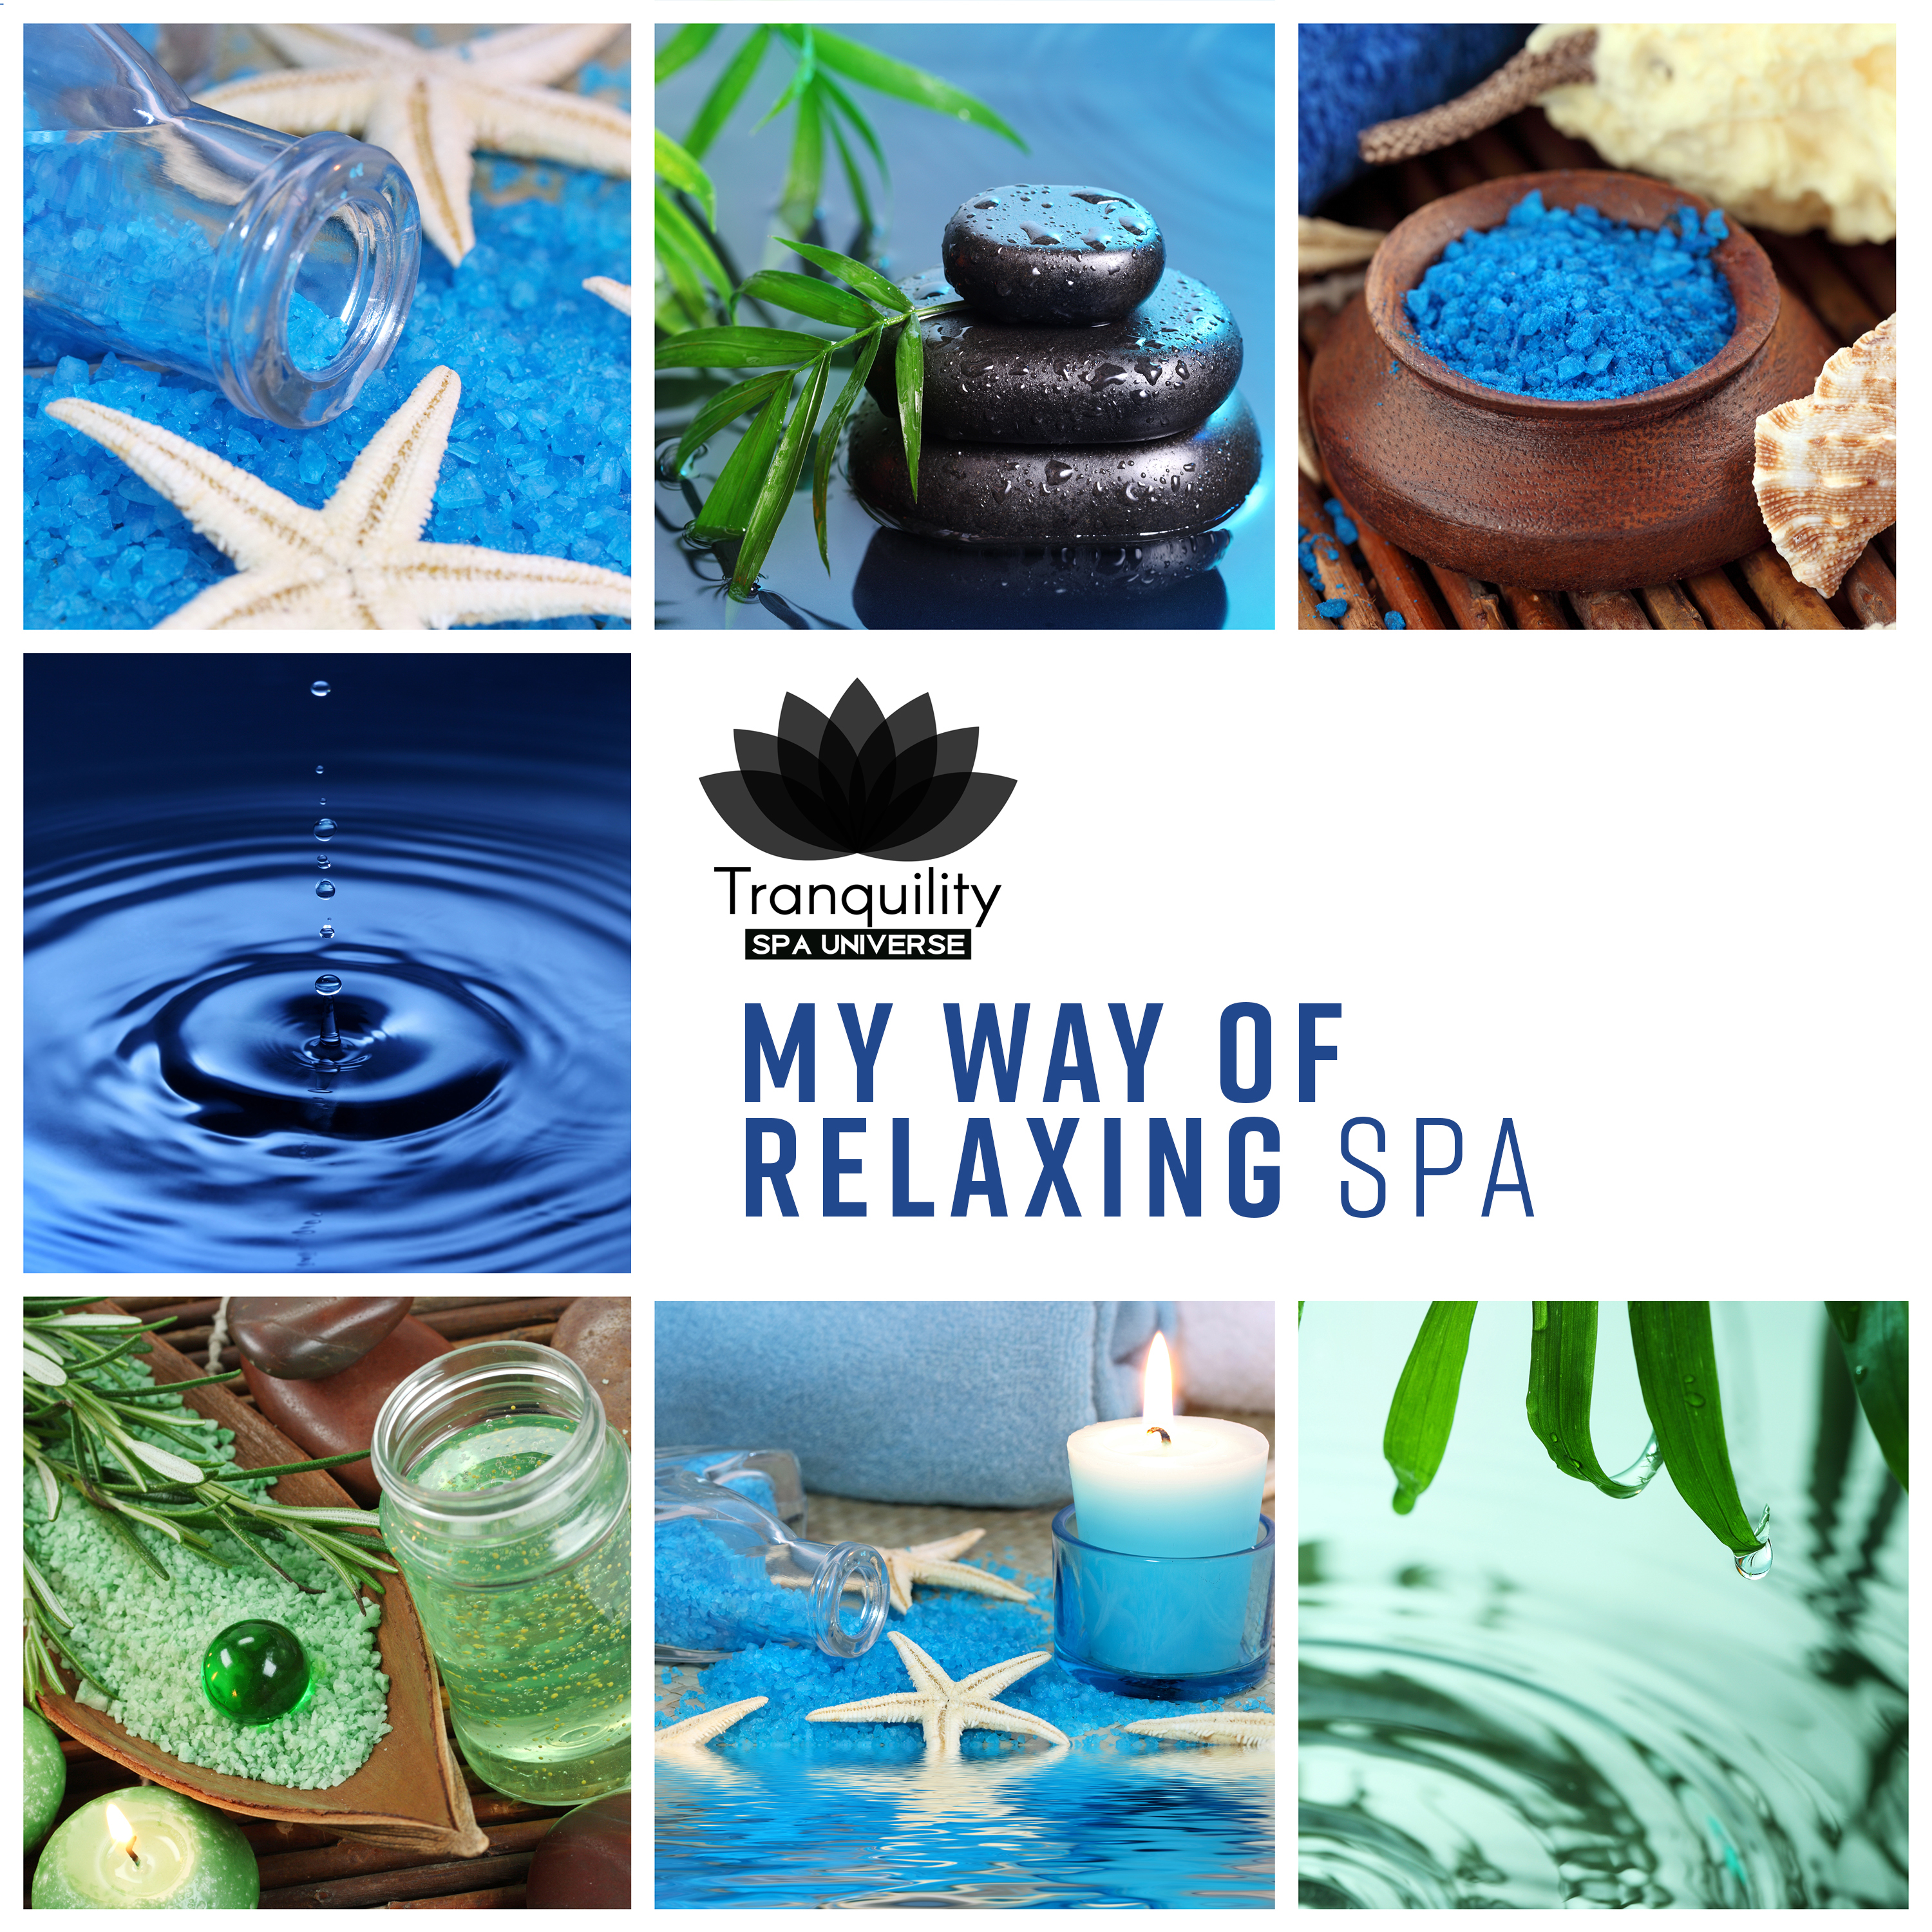 My Way of Relaxing (Spa, Pleasures & Beauty, Thai Massage, Bath, Sauna, Enjoy of Serenity, Relaxing Natural Ambience, Rest & Health, Sensitive Spa Music Collection, Feeling Good)